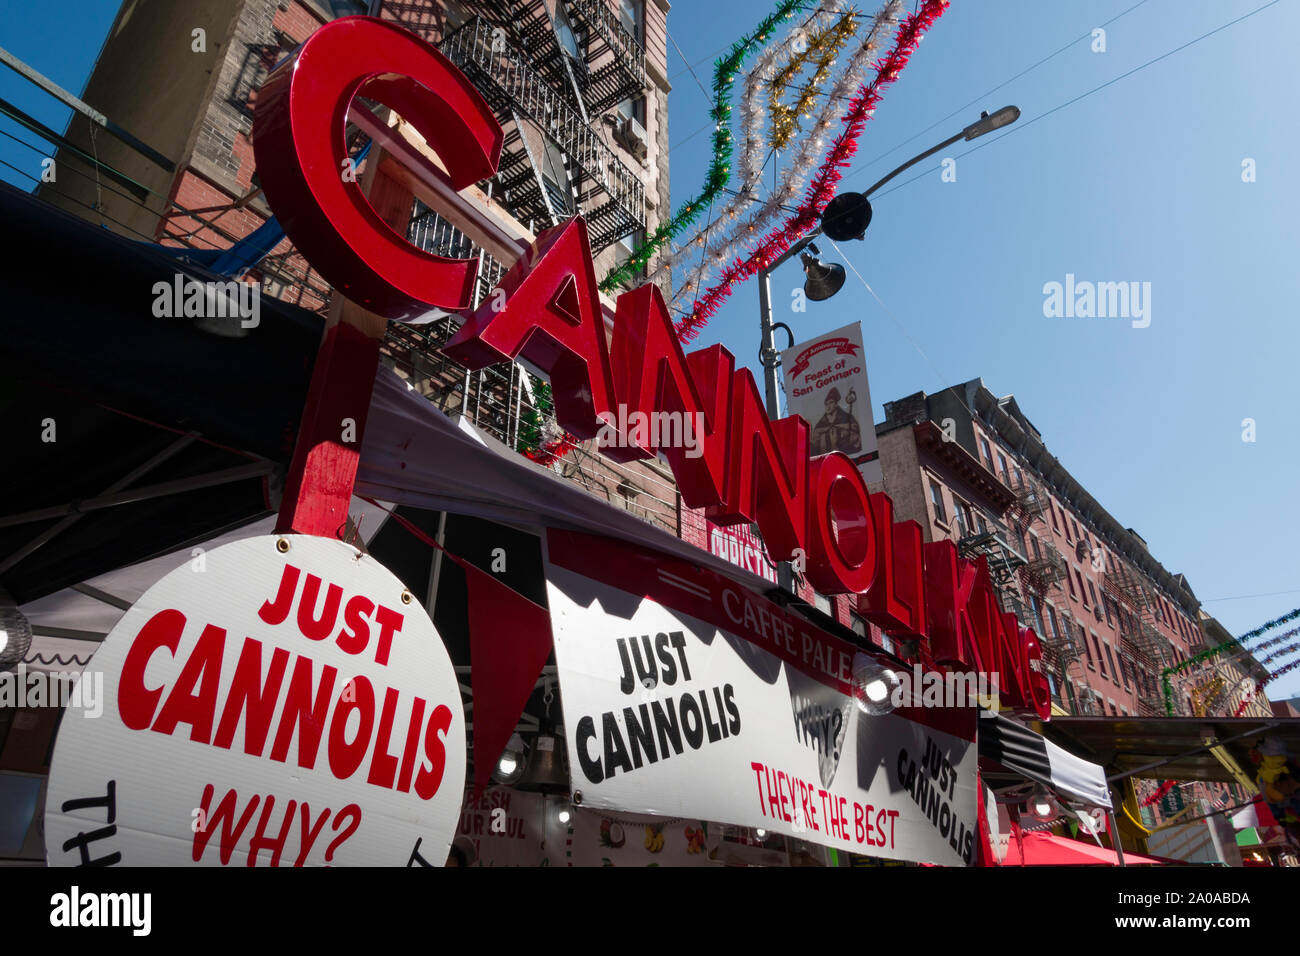 93rd Annual Feast of San Gennaro in Little Italy, New York City, USA Stock Photo